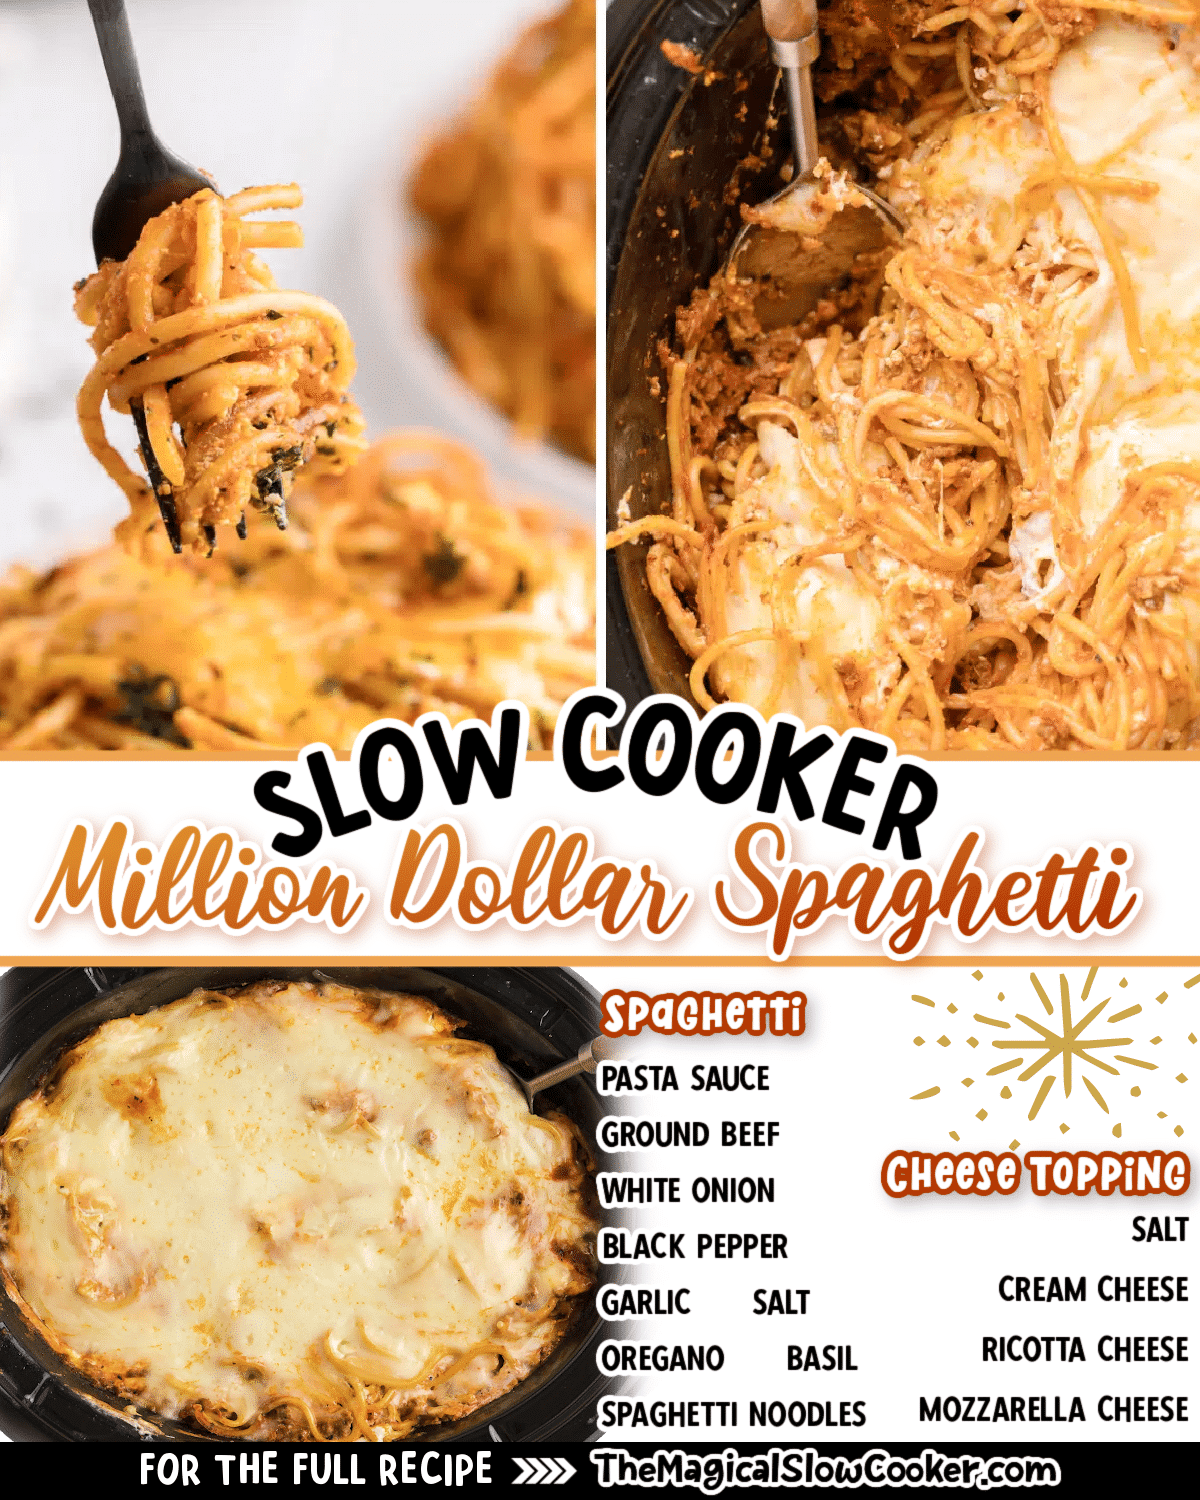 Million dollar spaghetti images with text of what the ingredients are.